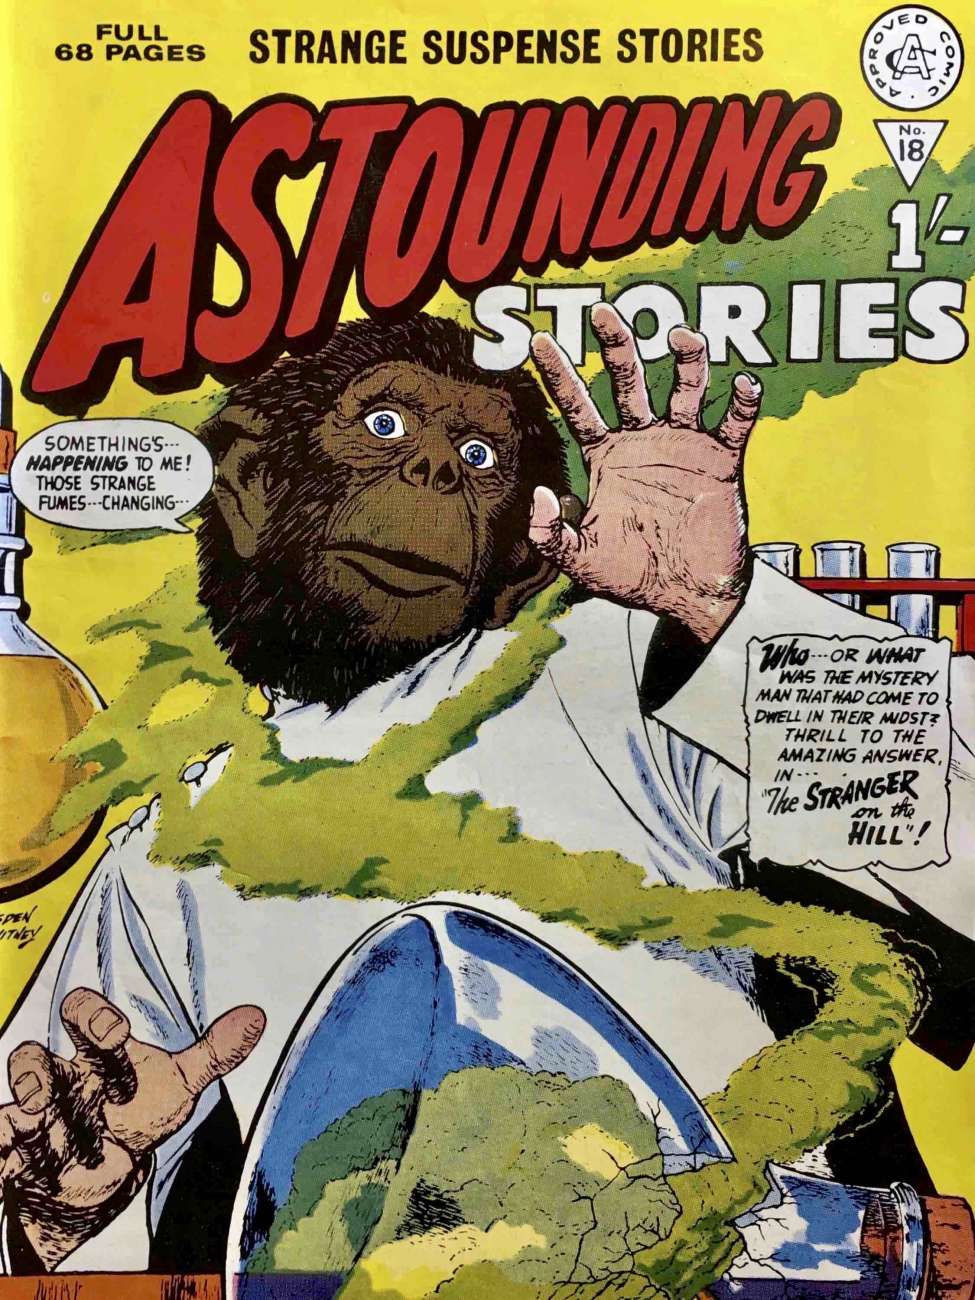 Book Cover For Astounding Stories 18